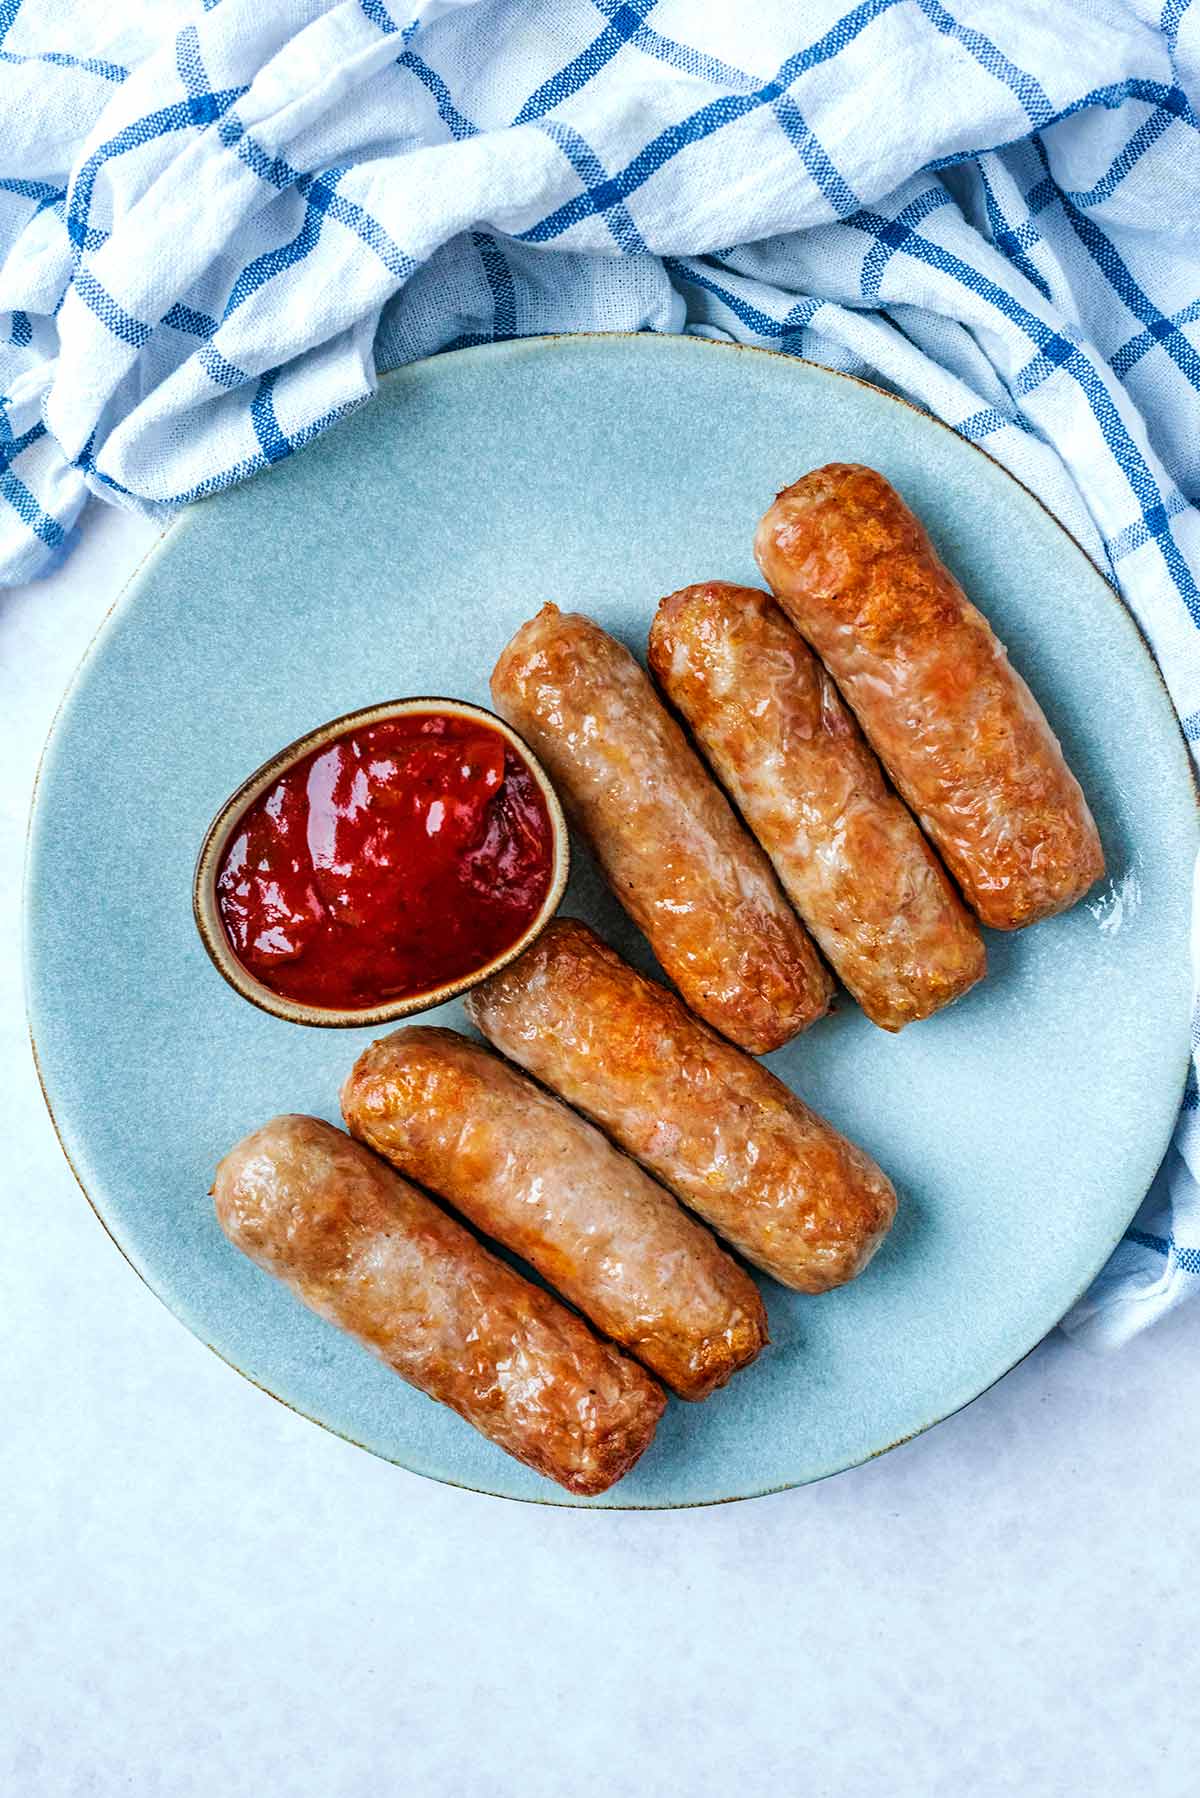 Six cooked sausages on a round plate with a small pot of ketchup.